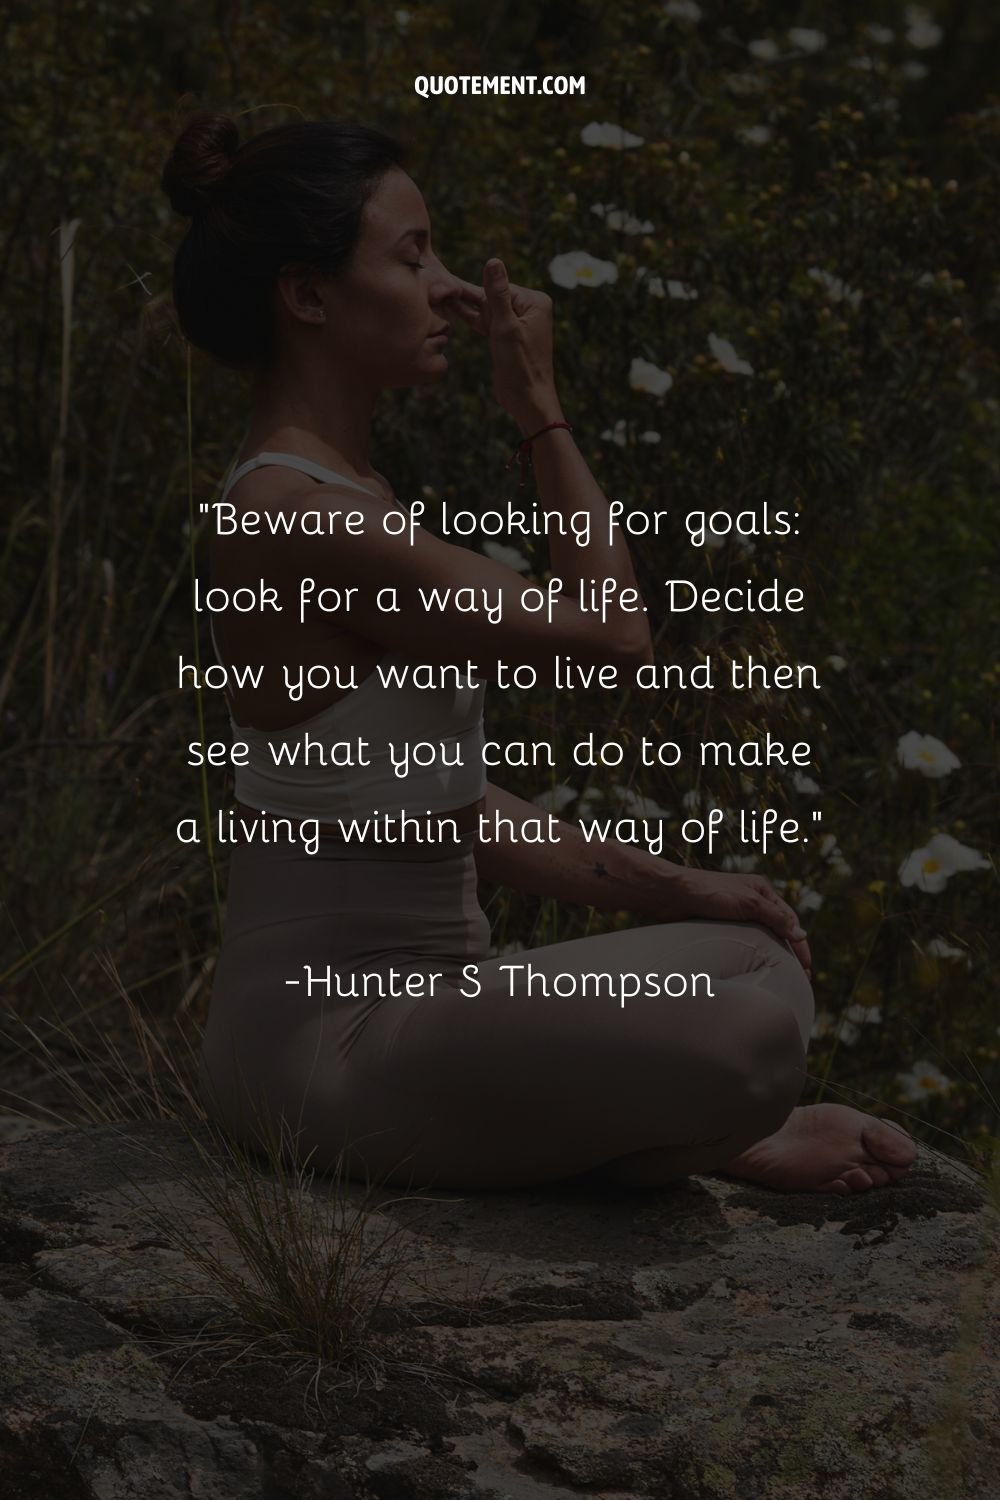 Beware of looking for goals look for a way of life. Decide how you want to live and then see what you can do to make a living within that way of life